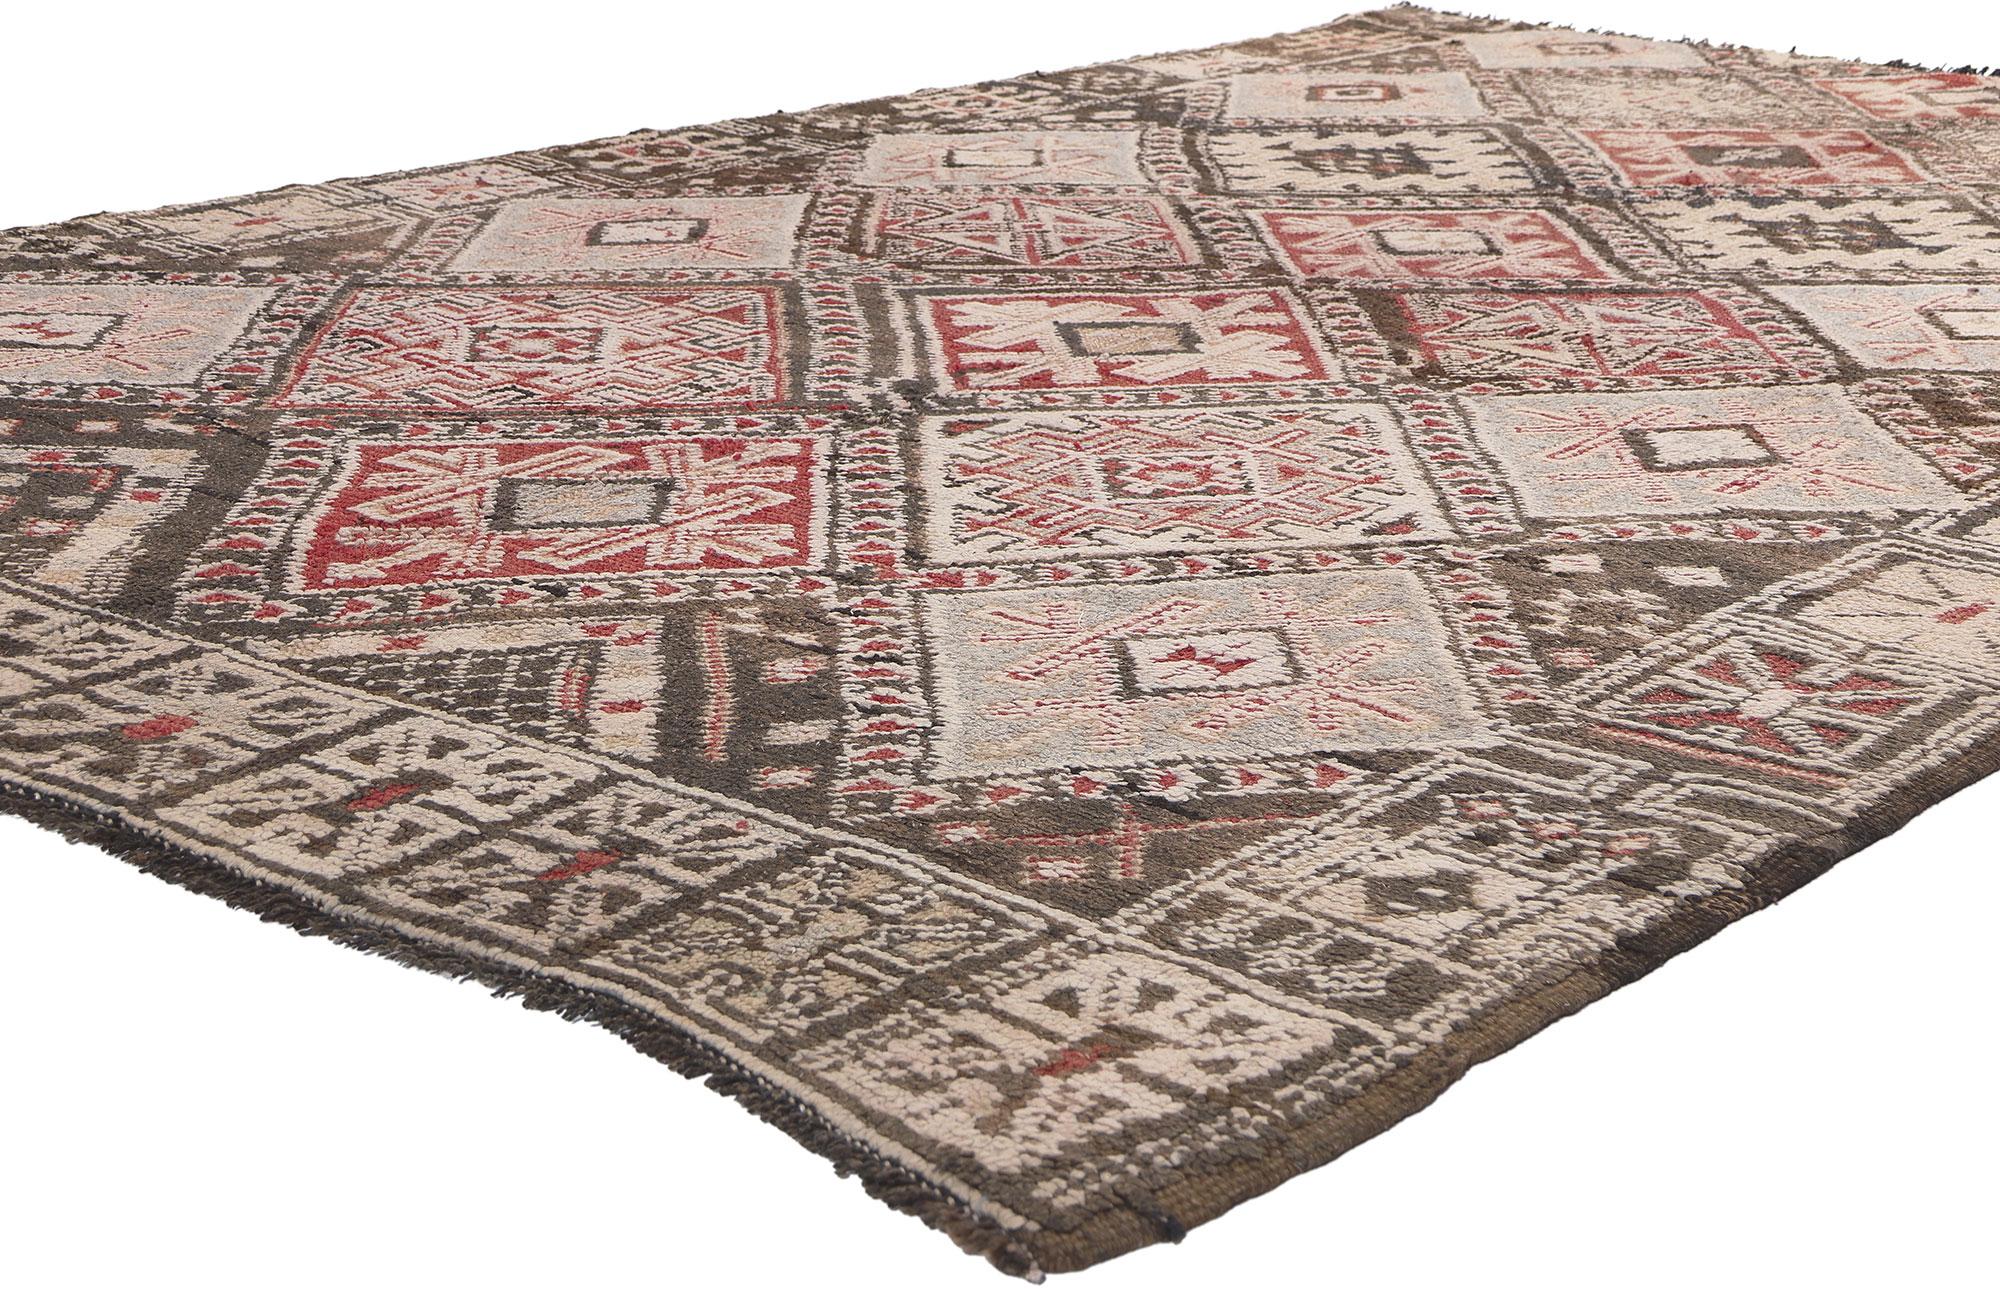 20856 Vintage Beni MGuild Moroccan Rug, 05'10 x 08'09. 
This hand-knotted wool vintage Beni M'Guild Moroccan rug features an all-over diamond lattice pattern spread across the abrashed field. The double lines composed of arrows crisscross